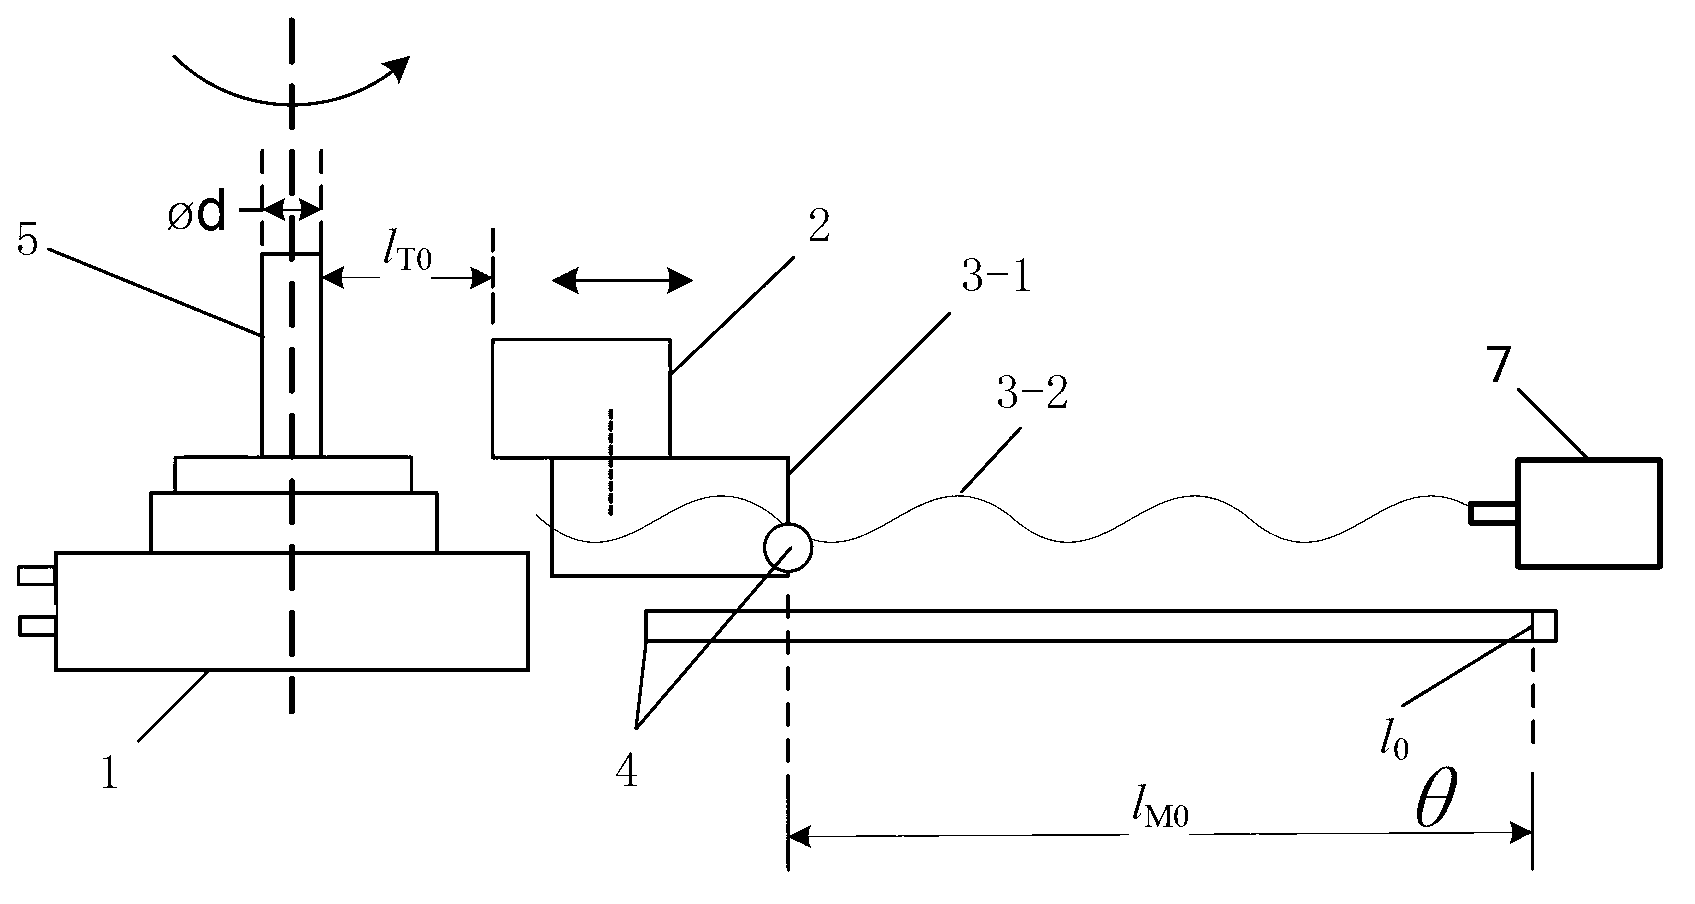 Cam profile detection system based on direct driving motor